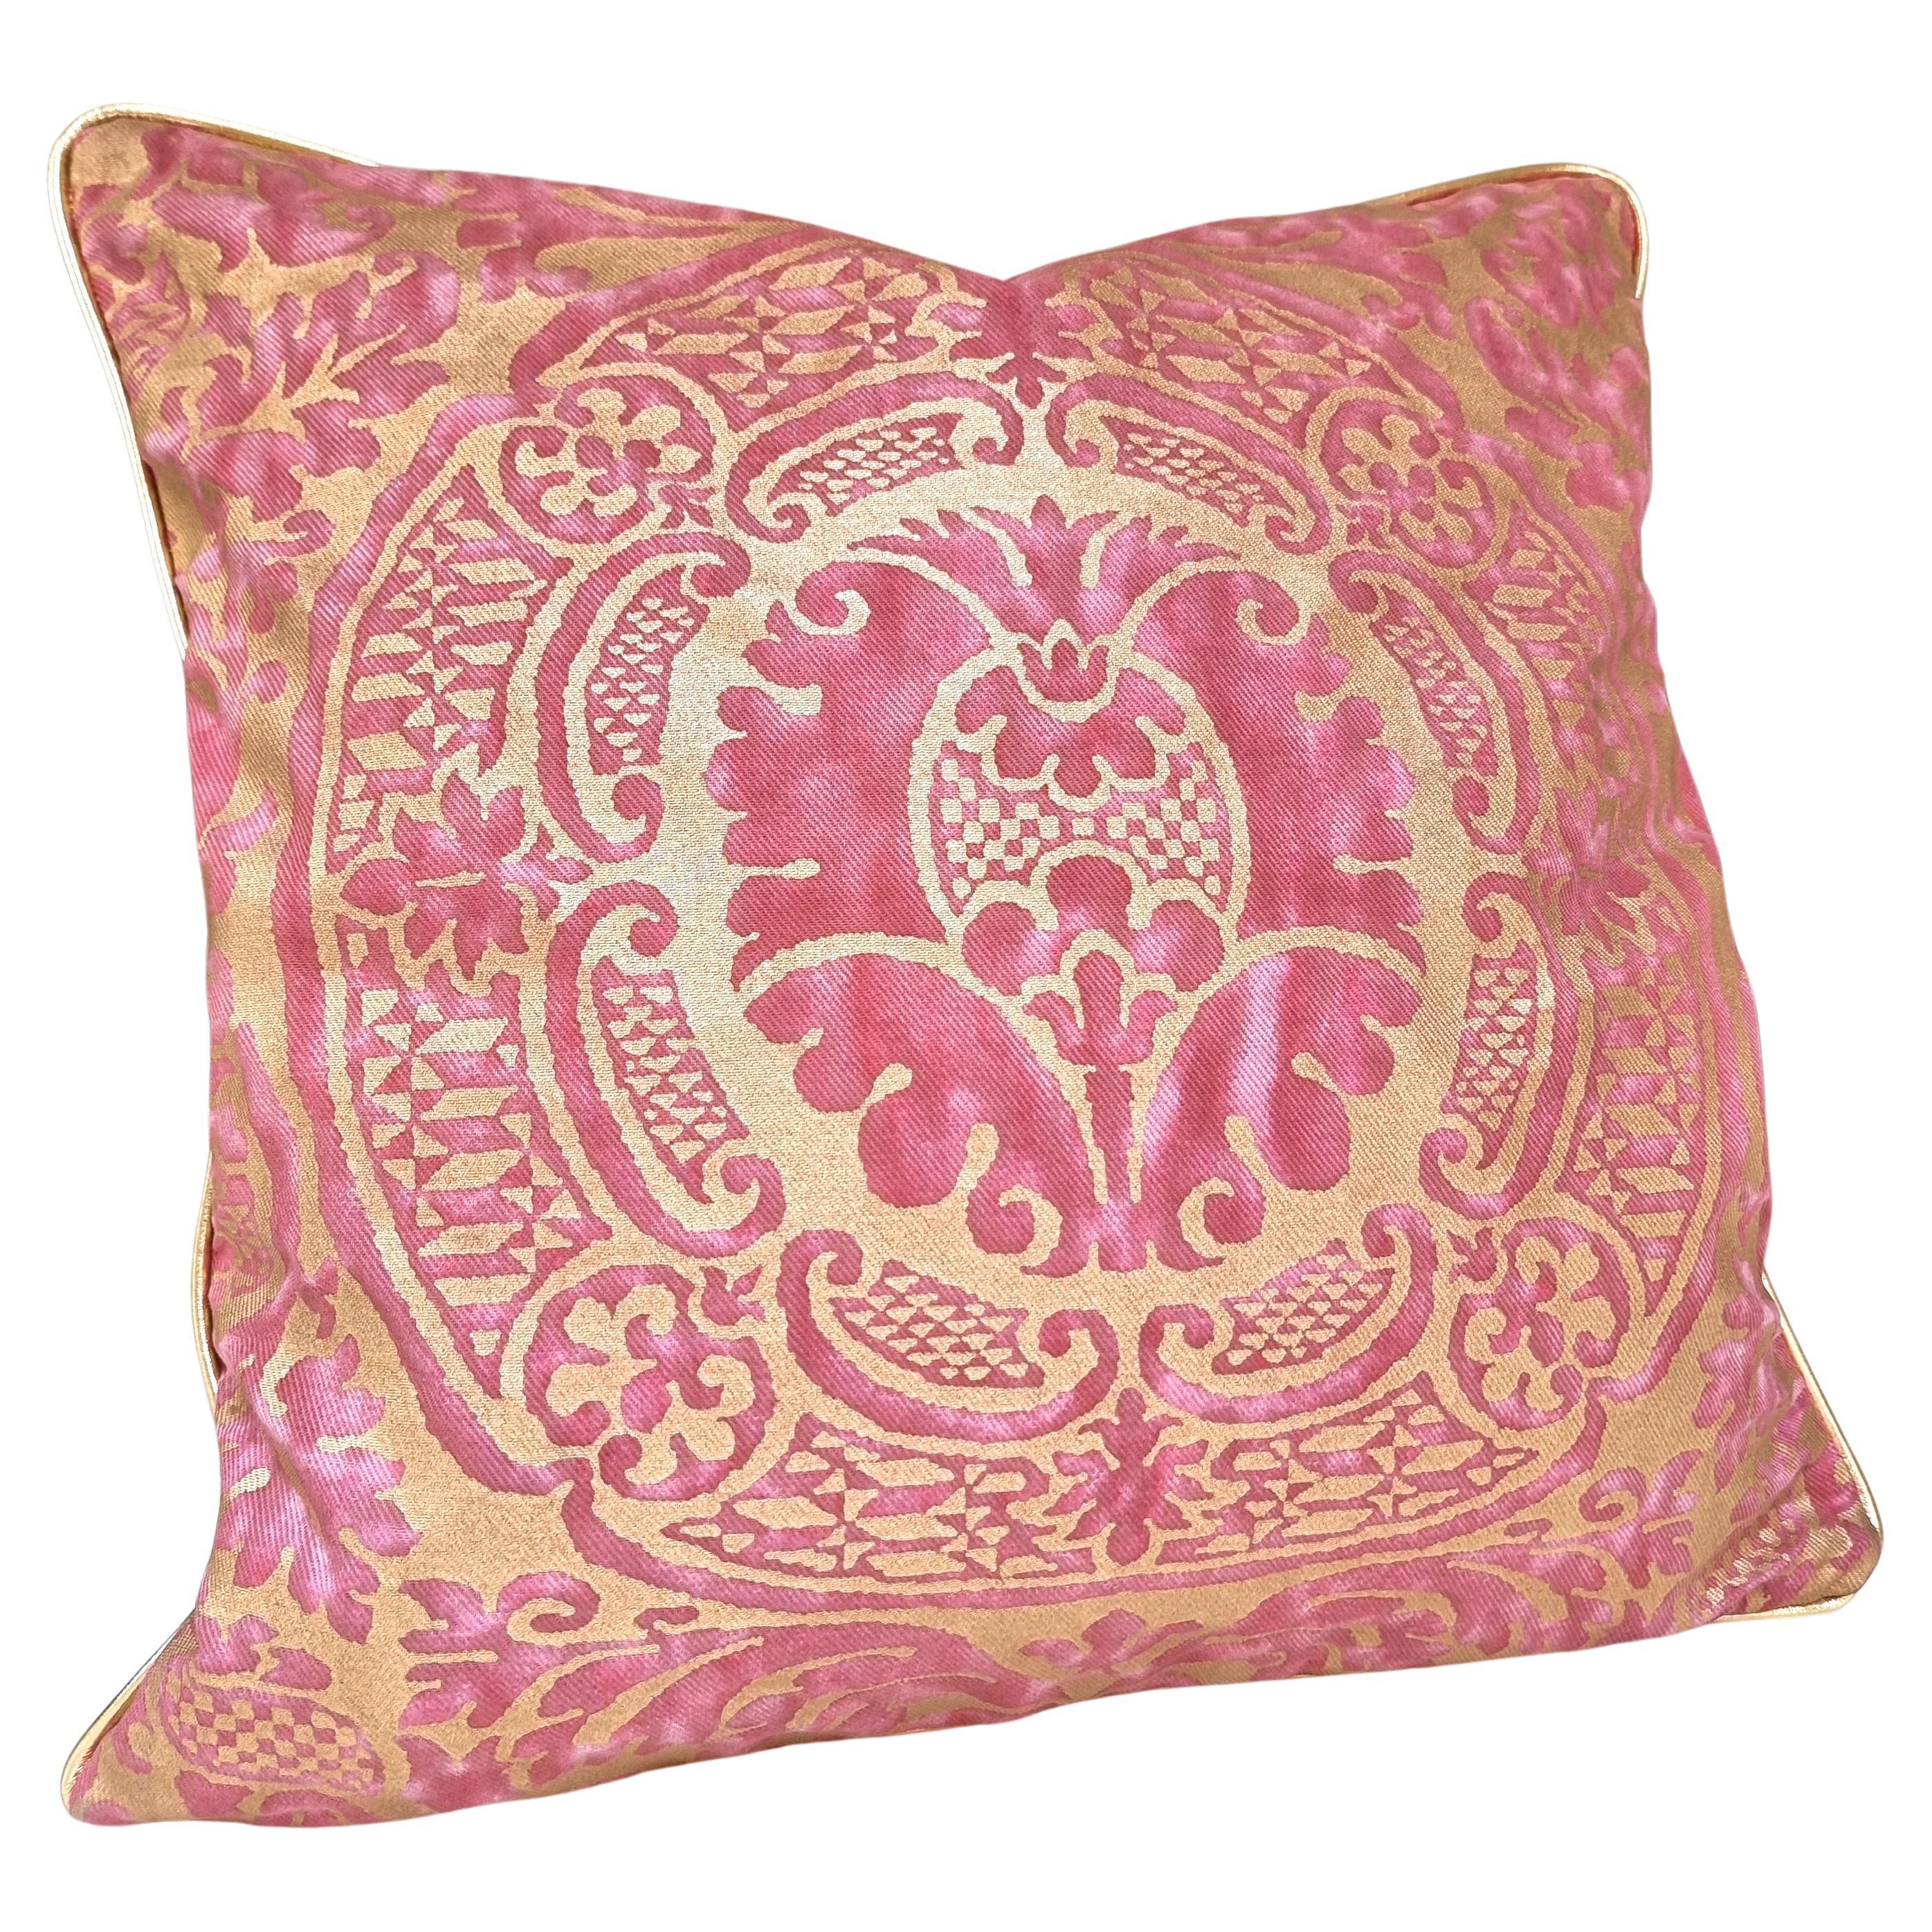 This amazing double-sided throw pillow is handmade using Fortuny fabric Orsini pattern in red & gold texture.
The pillow is embellished all along the four edges with Samuel & Sons leather piping cord in metallic gold color.
The pillow cover is fully